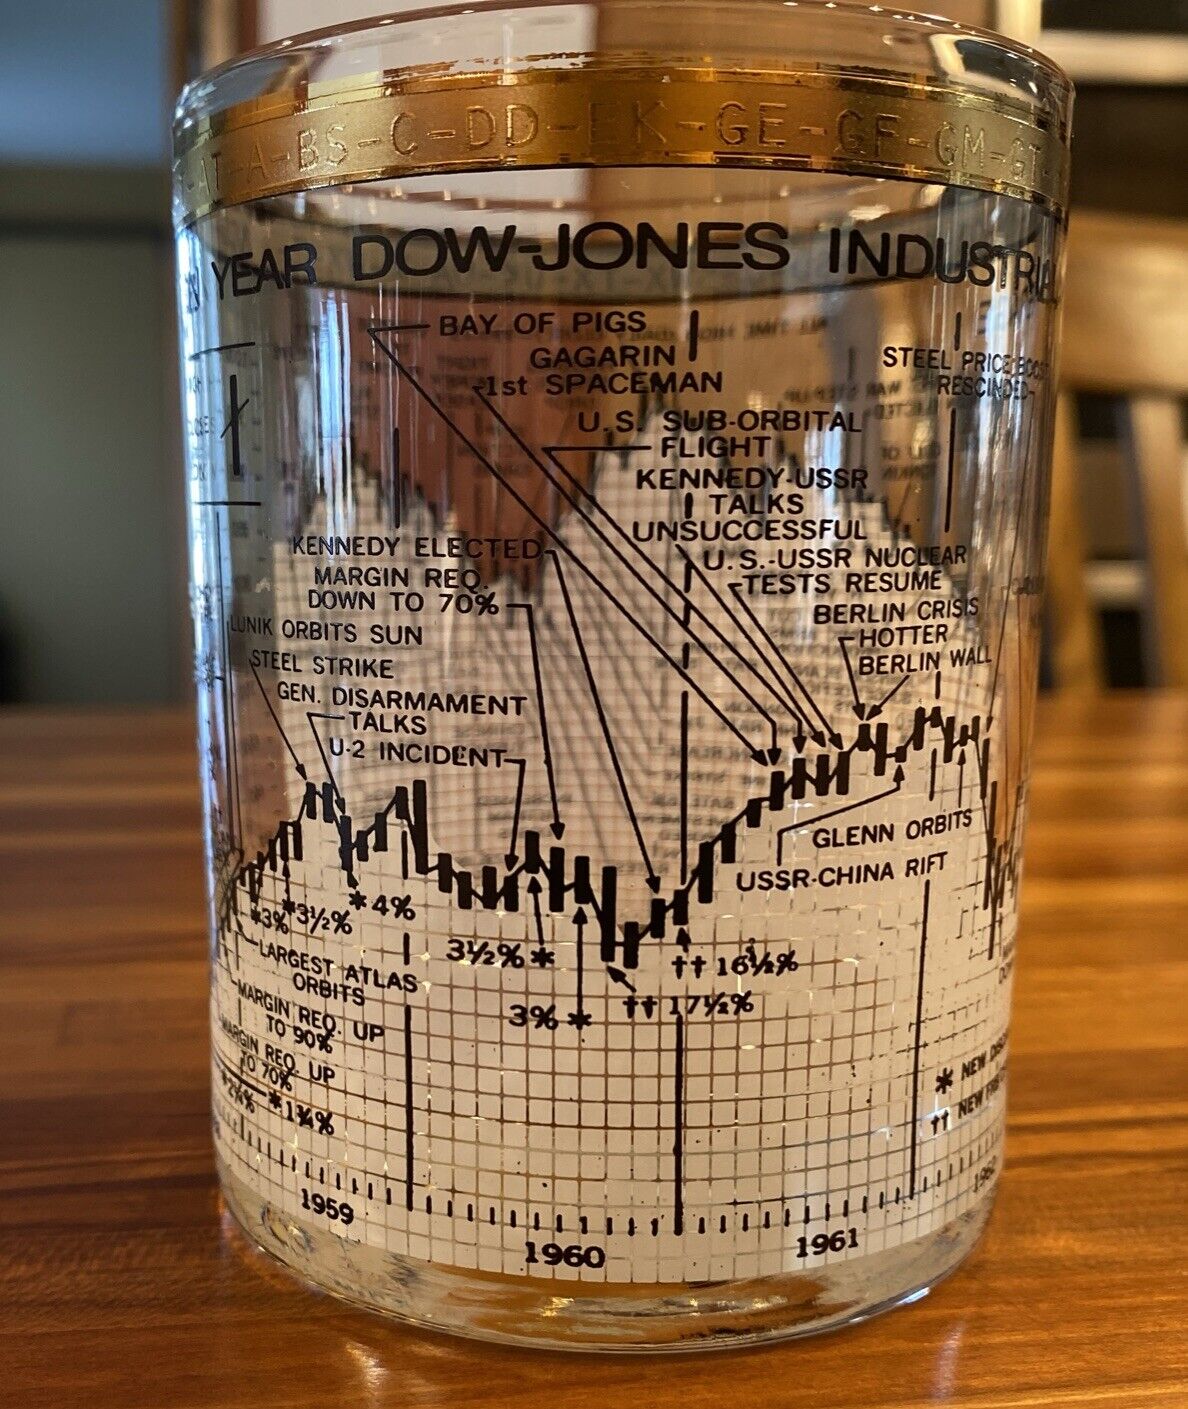 Cera - 10 Year Dow Jones Industrial Average Glass Cup (1958-1968)